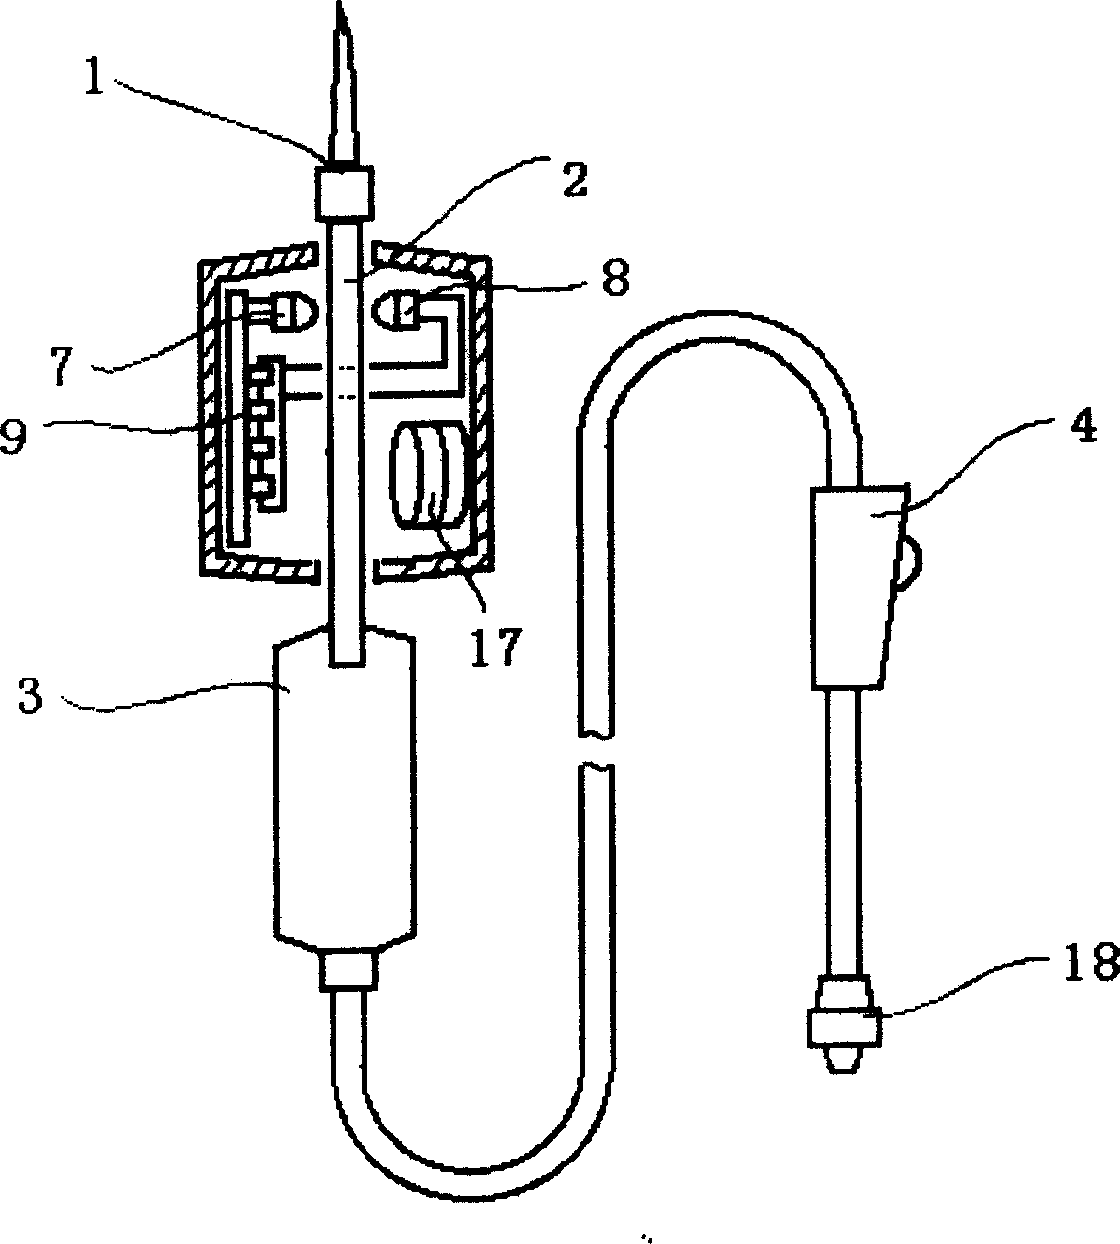 Electronic prompting transfusion device